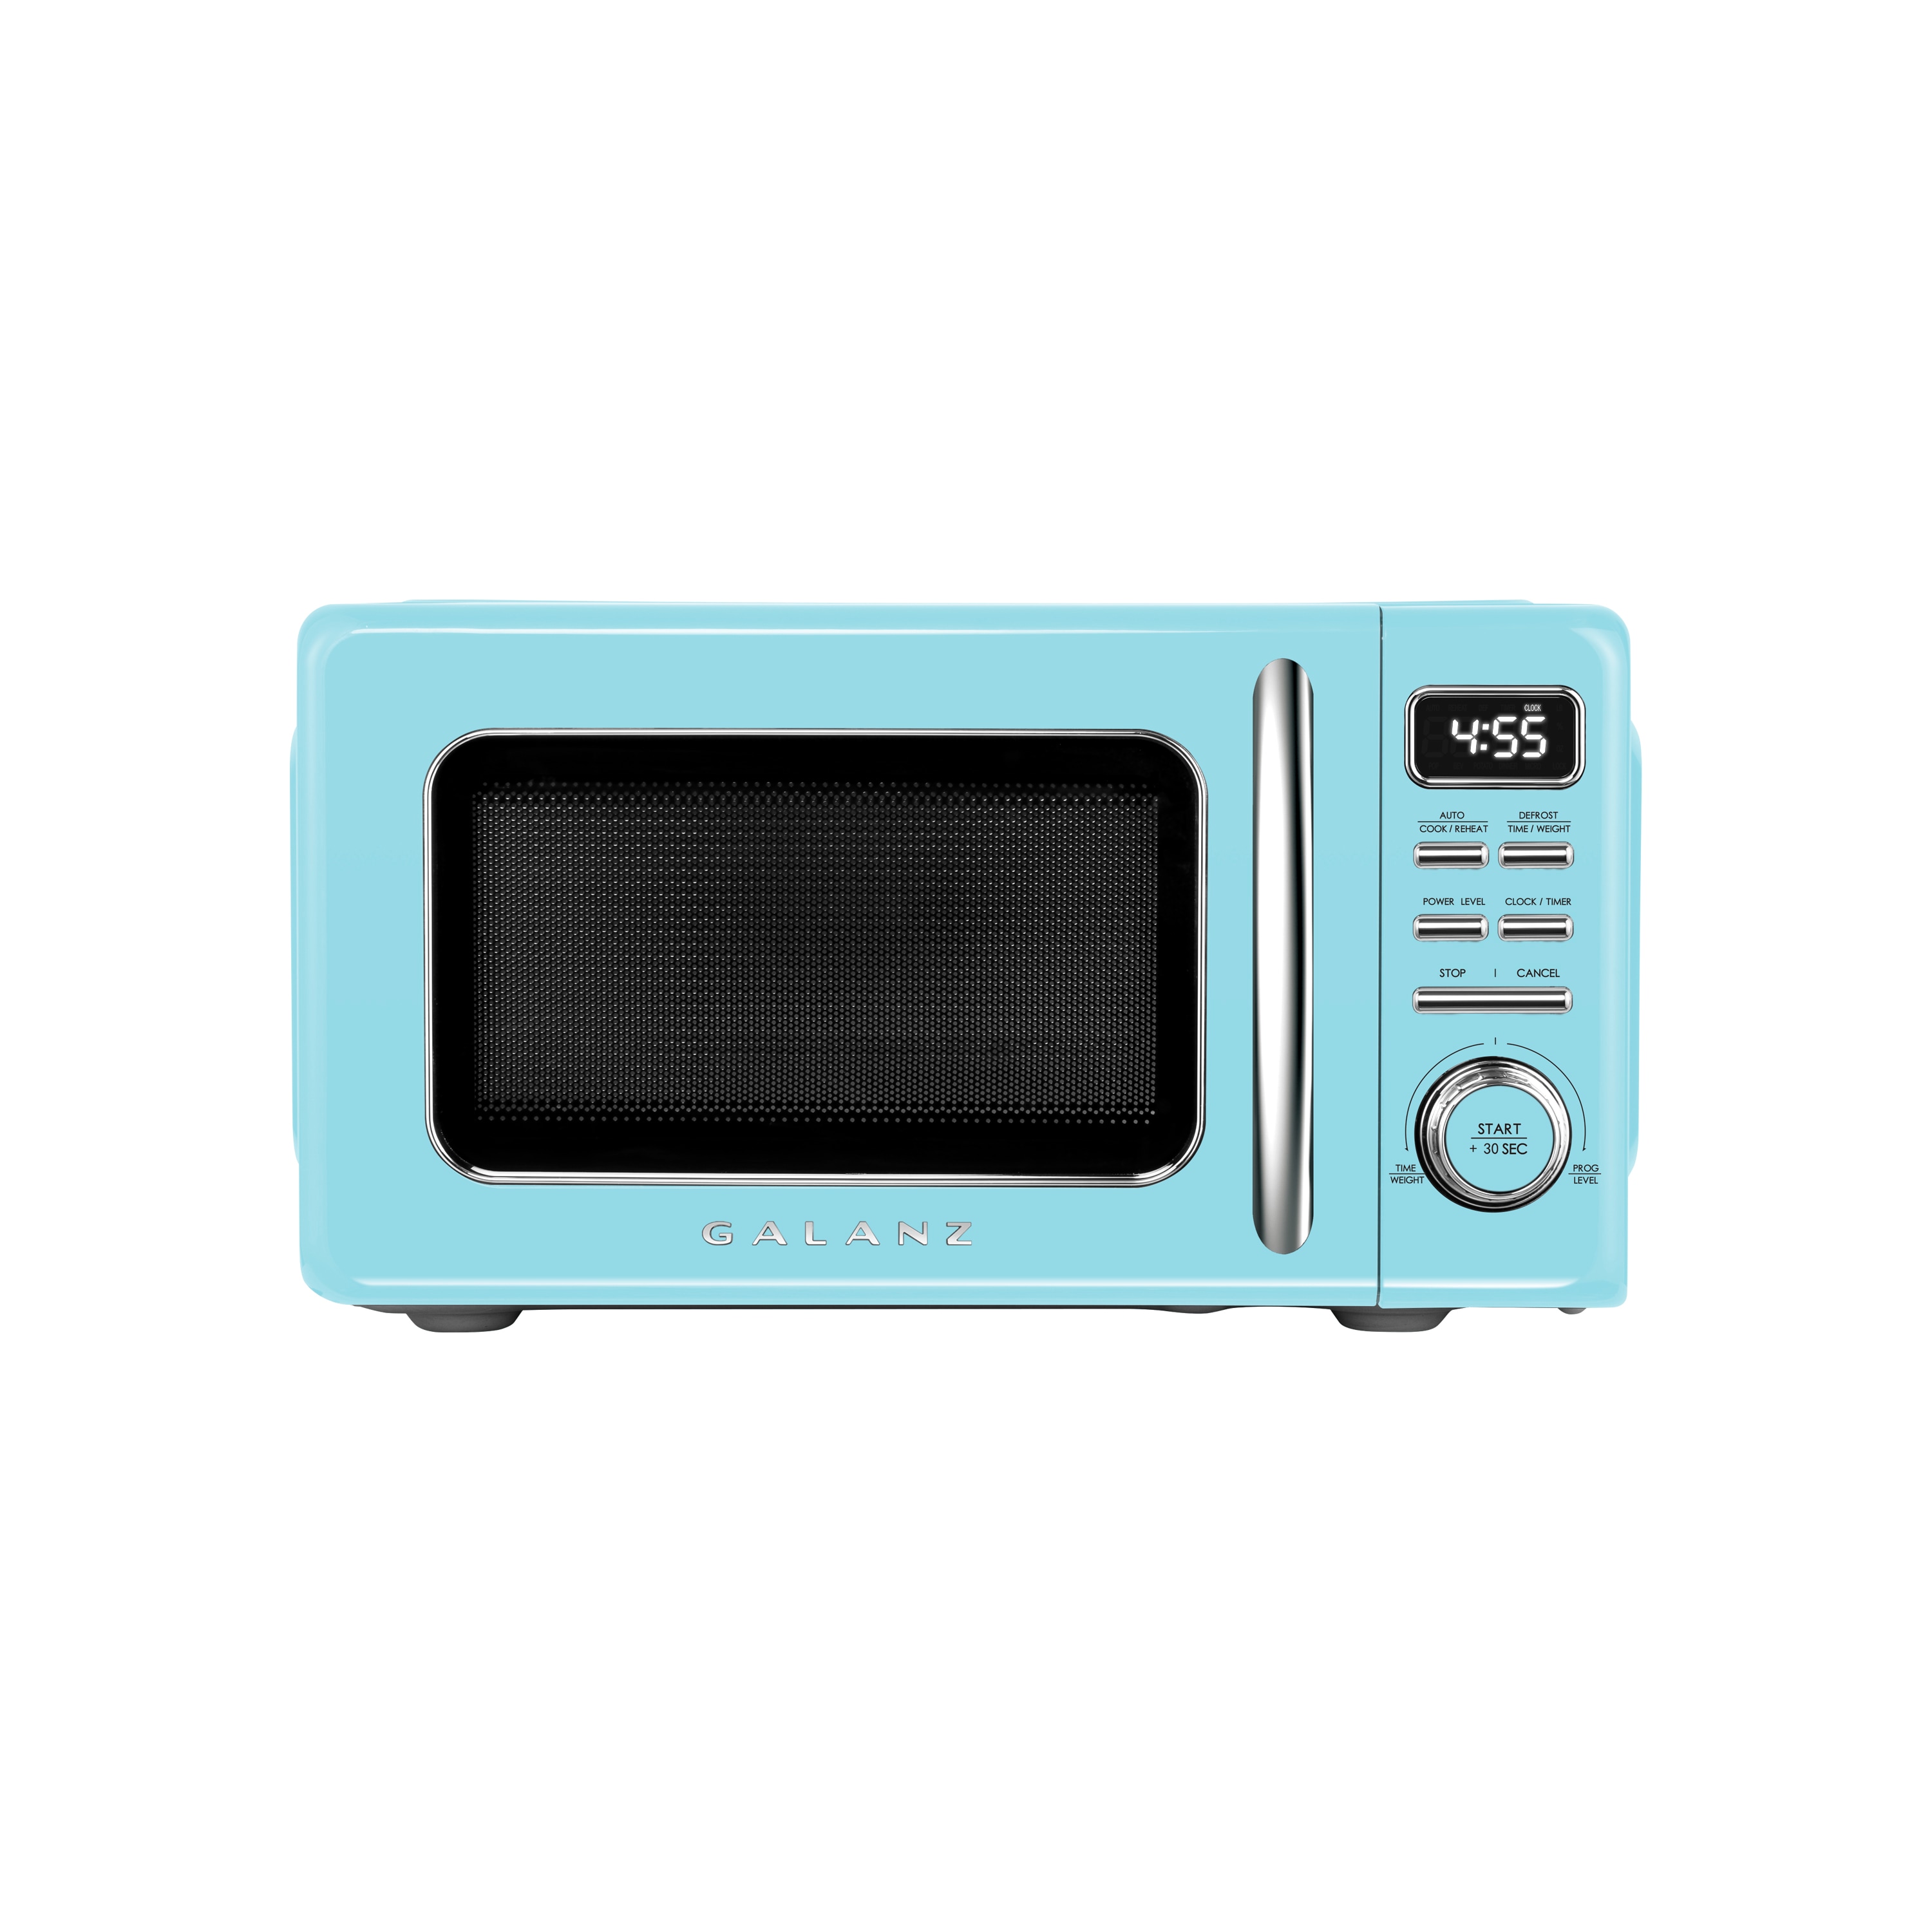 Galanz 0.7 Cu ft Retro Countertop Microwave Oven, 700 Watts, Blue